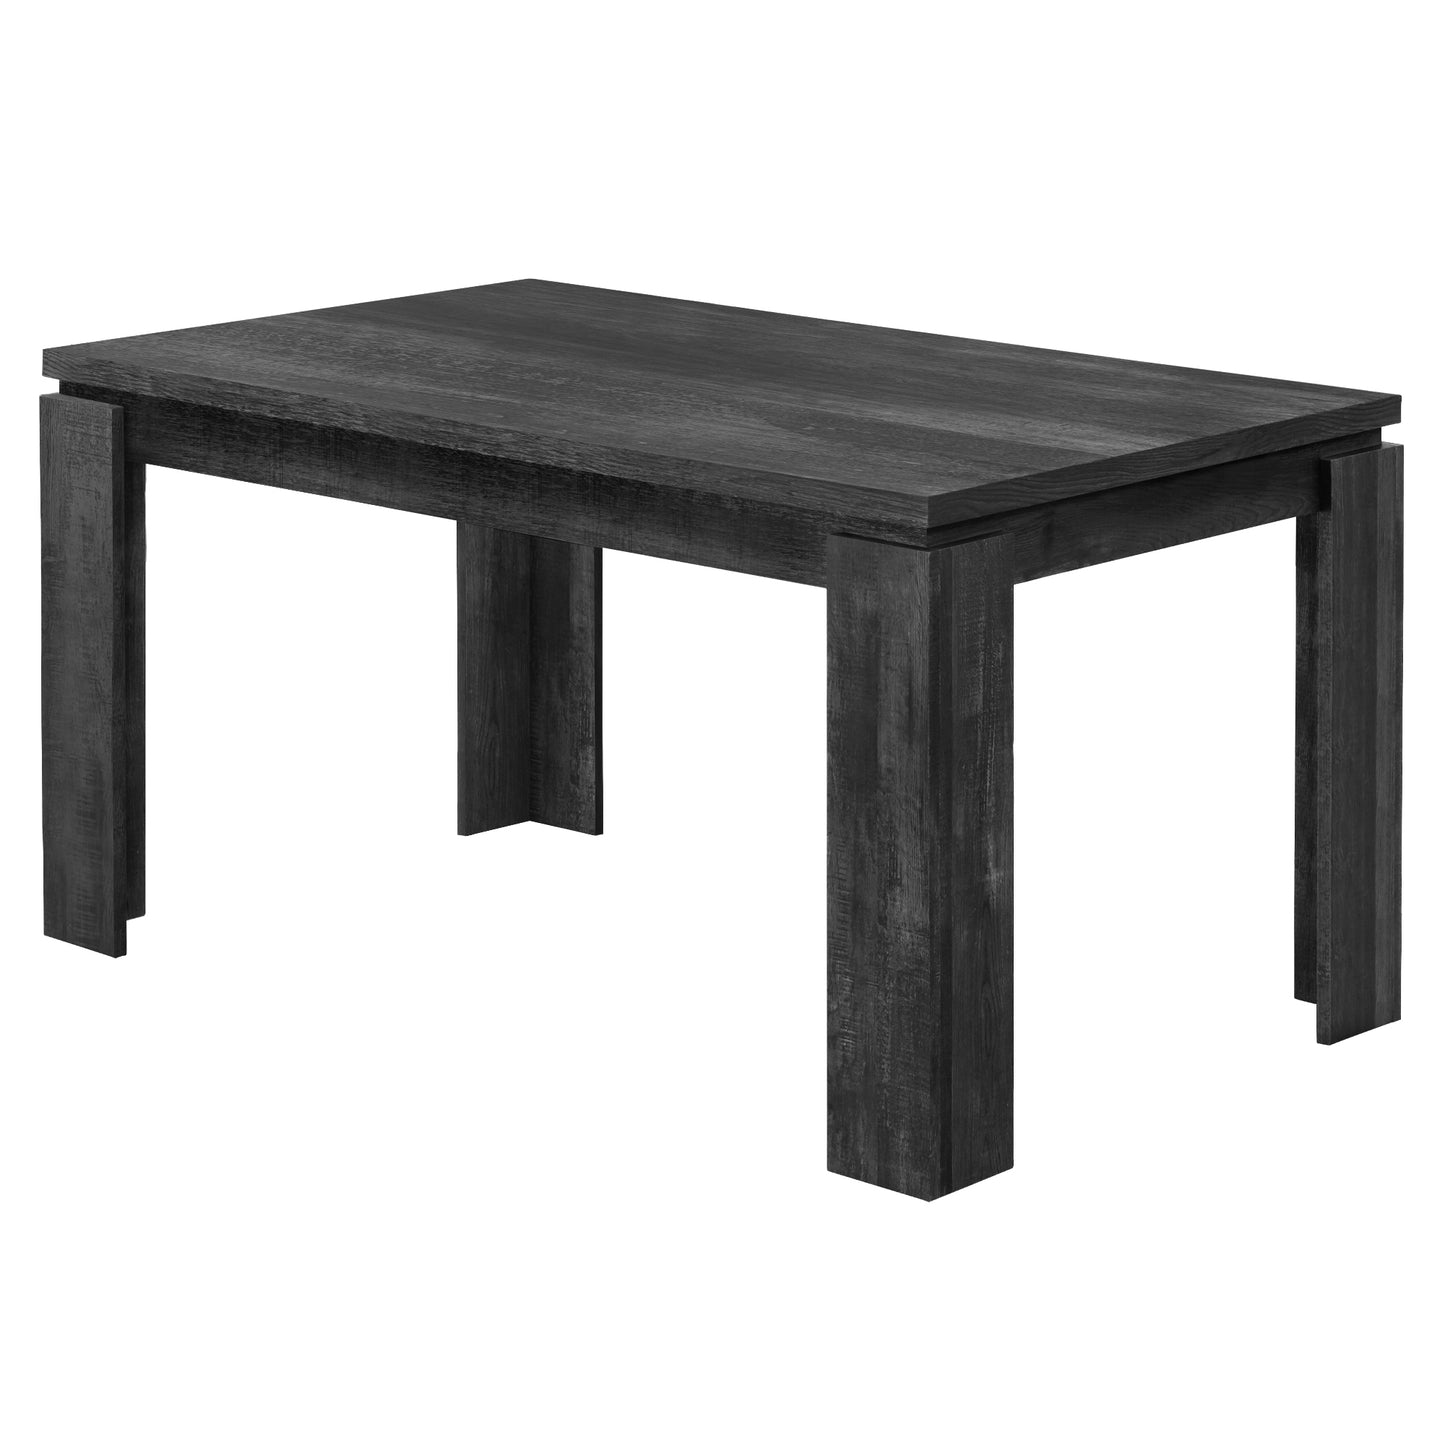 35.5" x 59" x 30.5" Black Reclaimed Wood Look  Dining Table-0